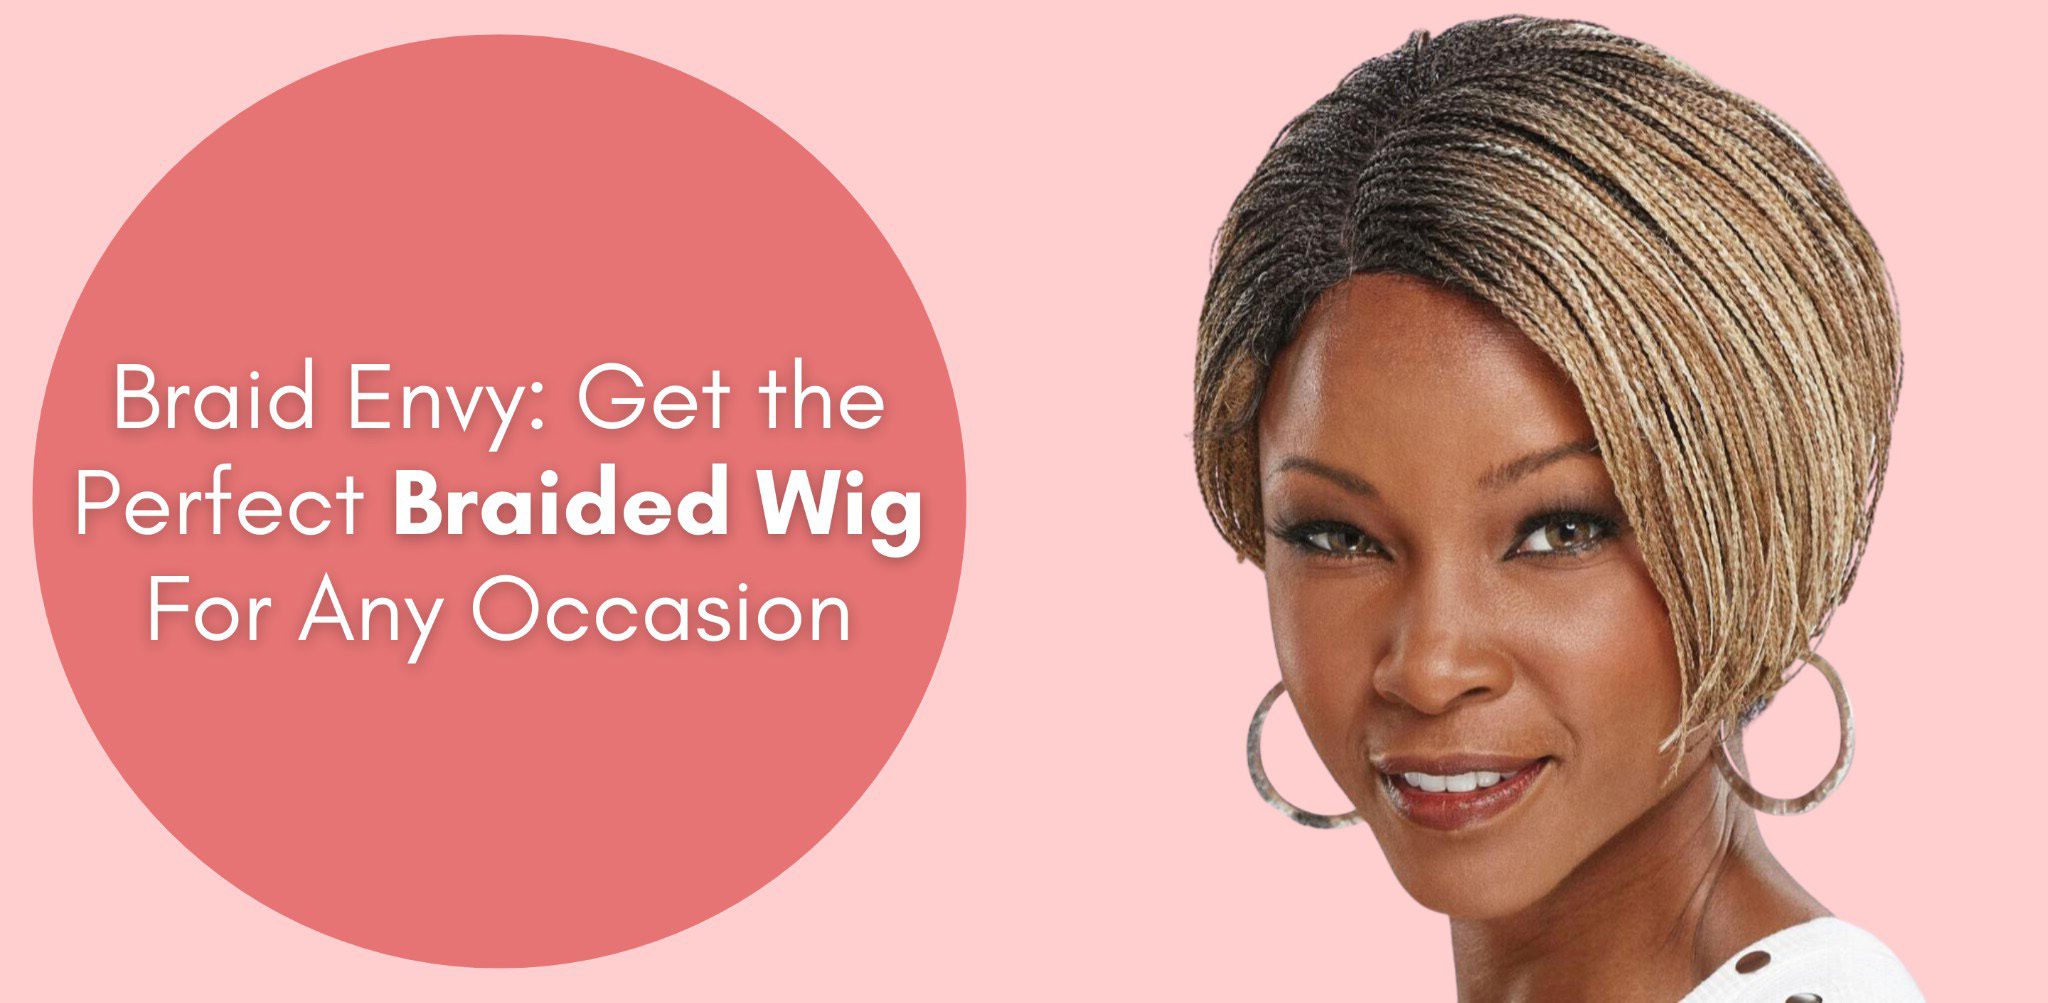 Braid Envy: Get the Perfect Braided Wig For Any Occasion